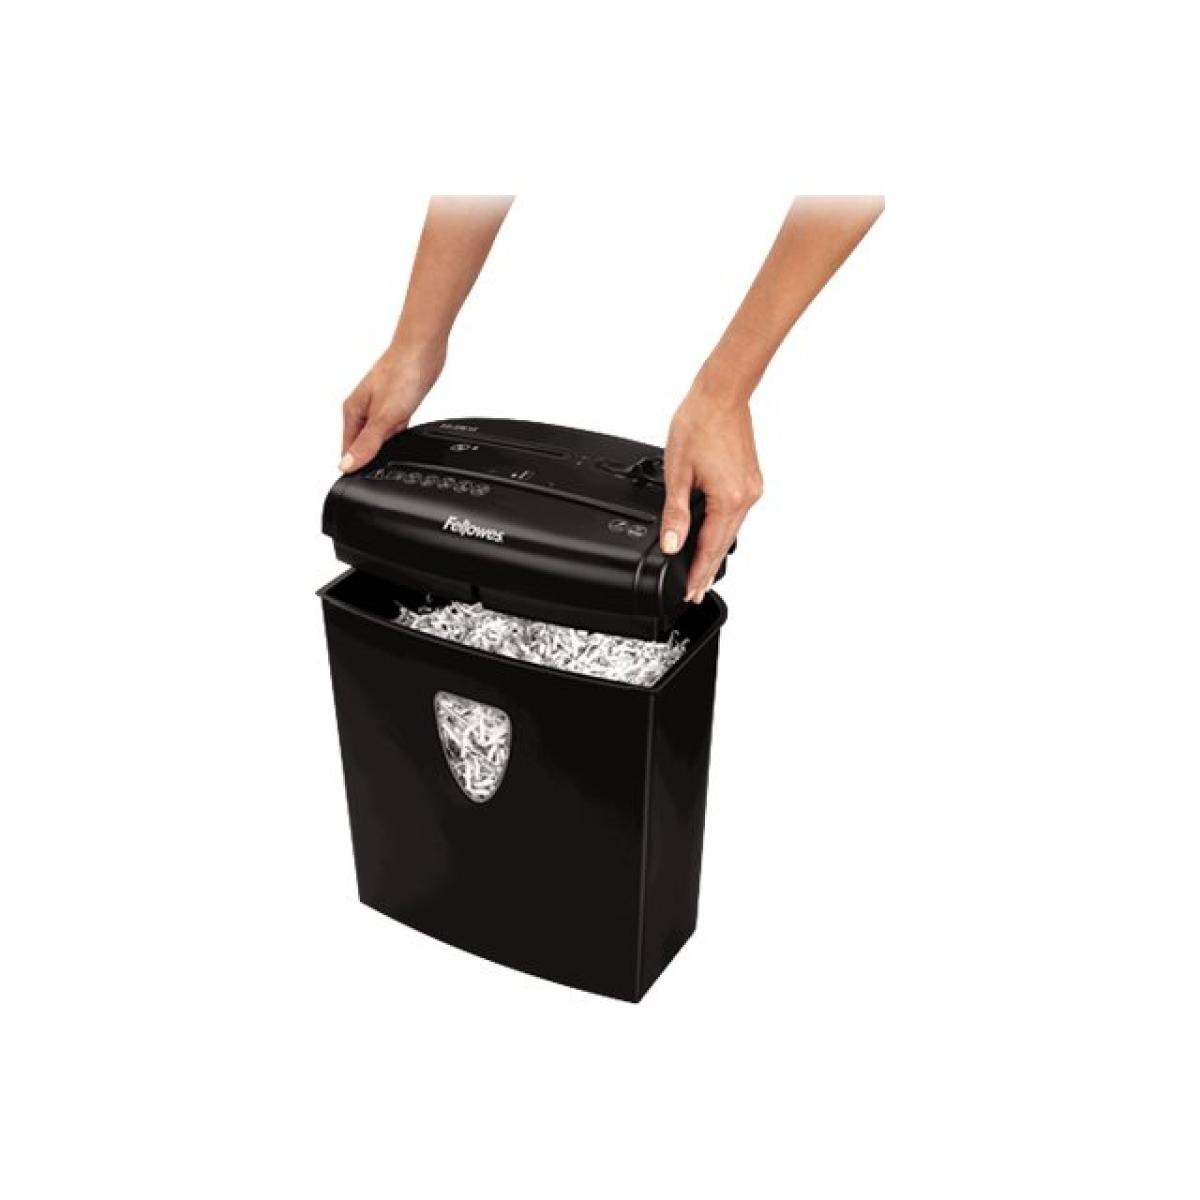 RAM ERA Technology - 📌GBC ALPHA RIBBON SHREDDER📌 Smart and functional,  ideal for the light home user and day-to-day shredding. ✓7.25 mm Ribbon cut  strips, P-1 security level for everyday documents ✓Maximum